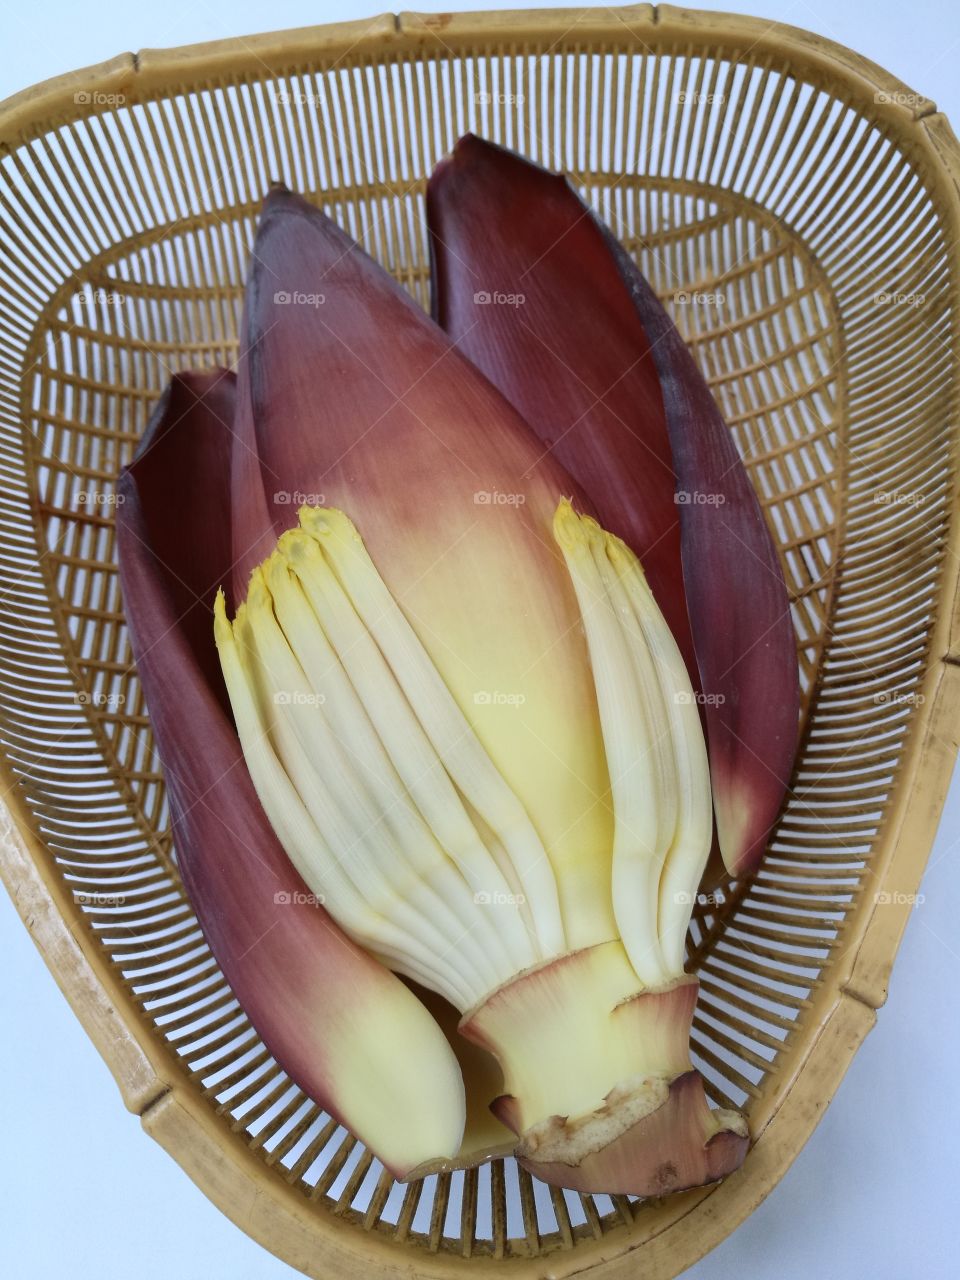 Banana blossom in a basket isolated on white background.